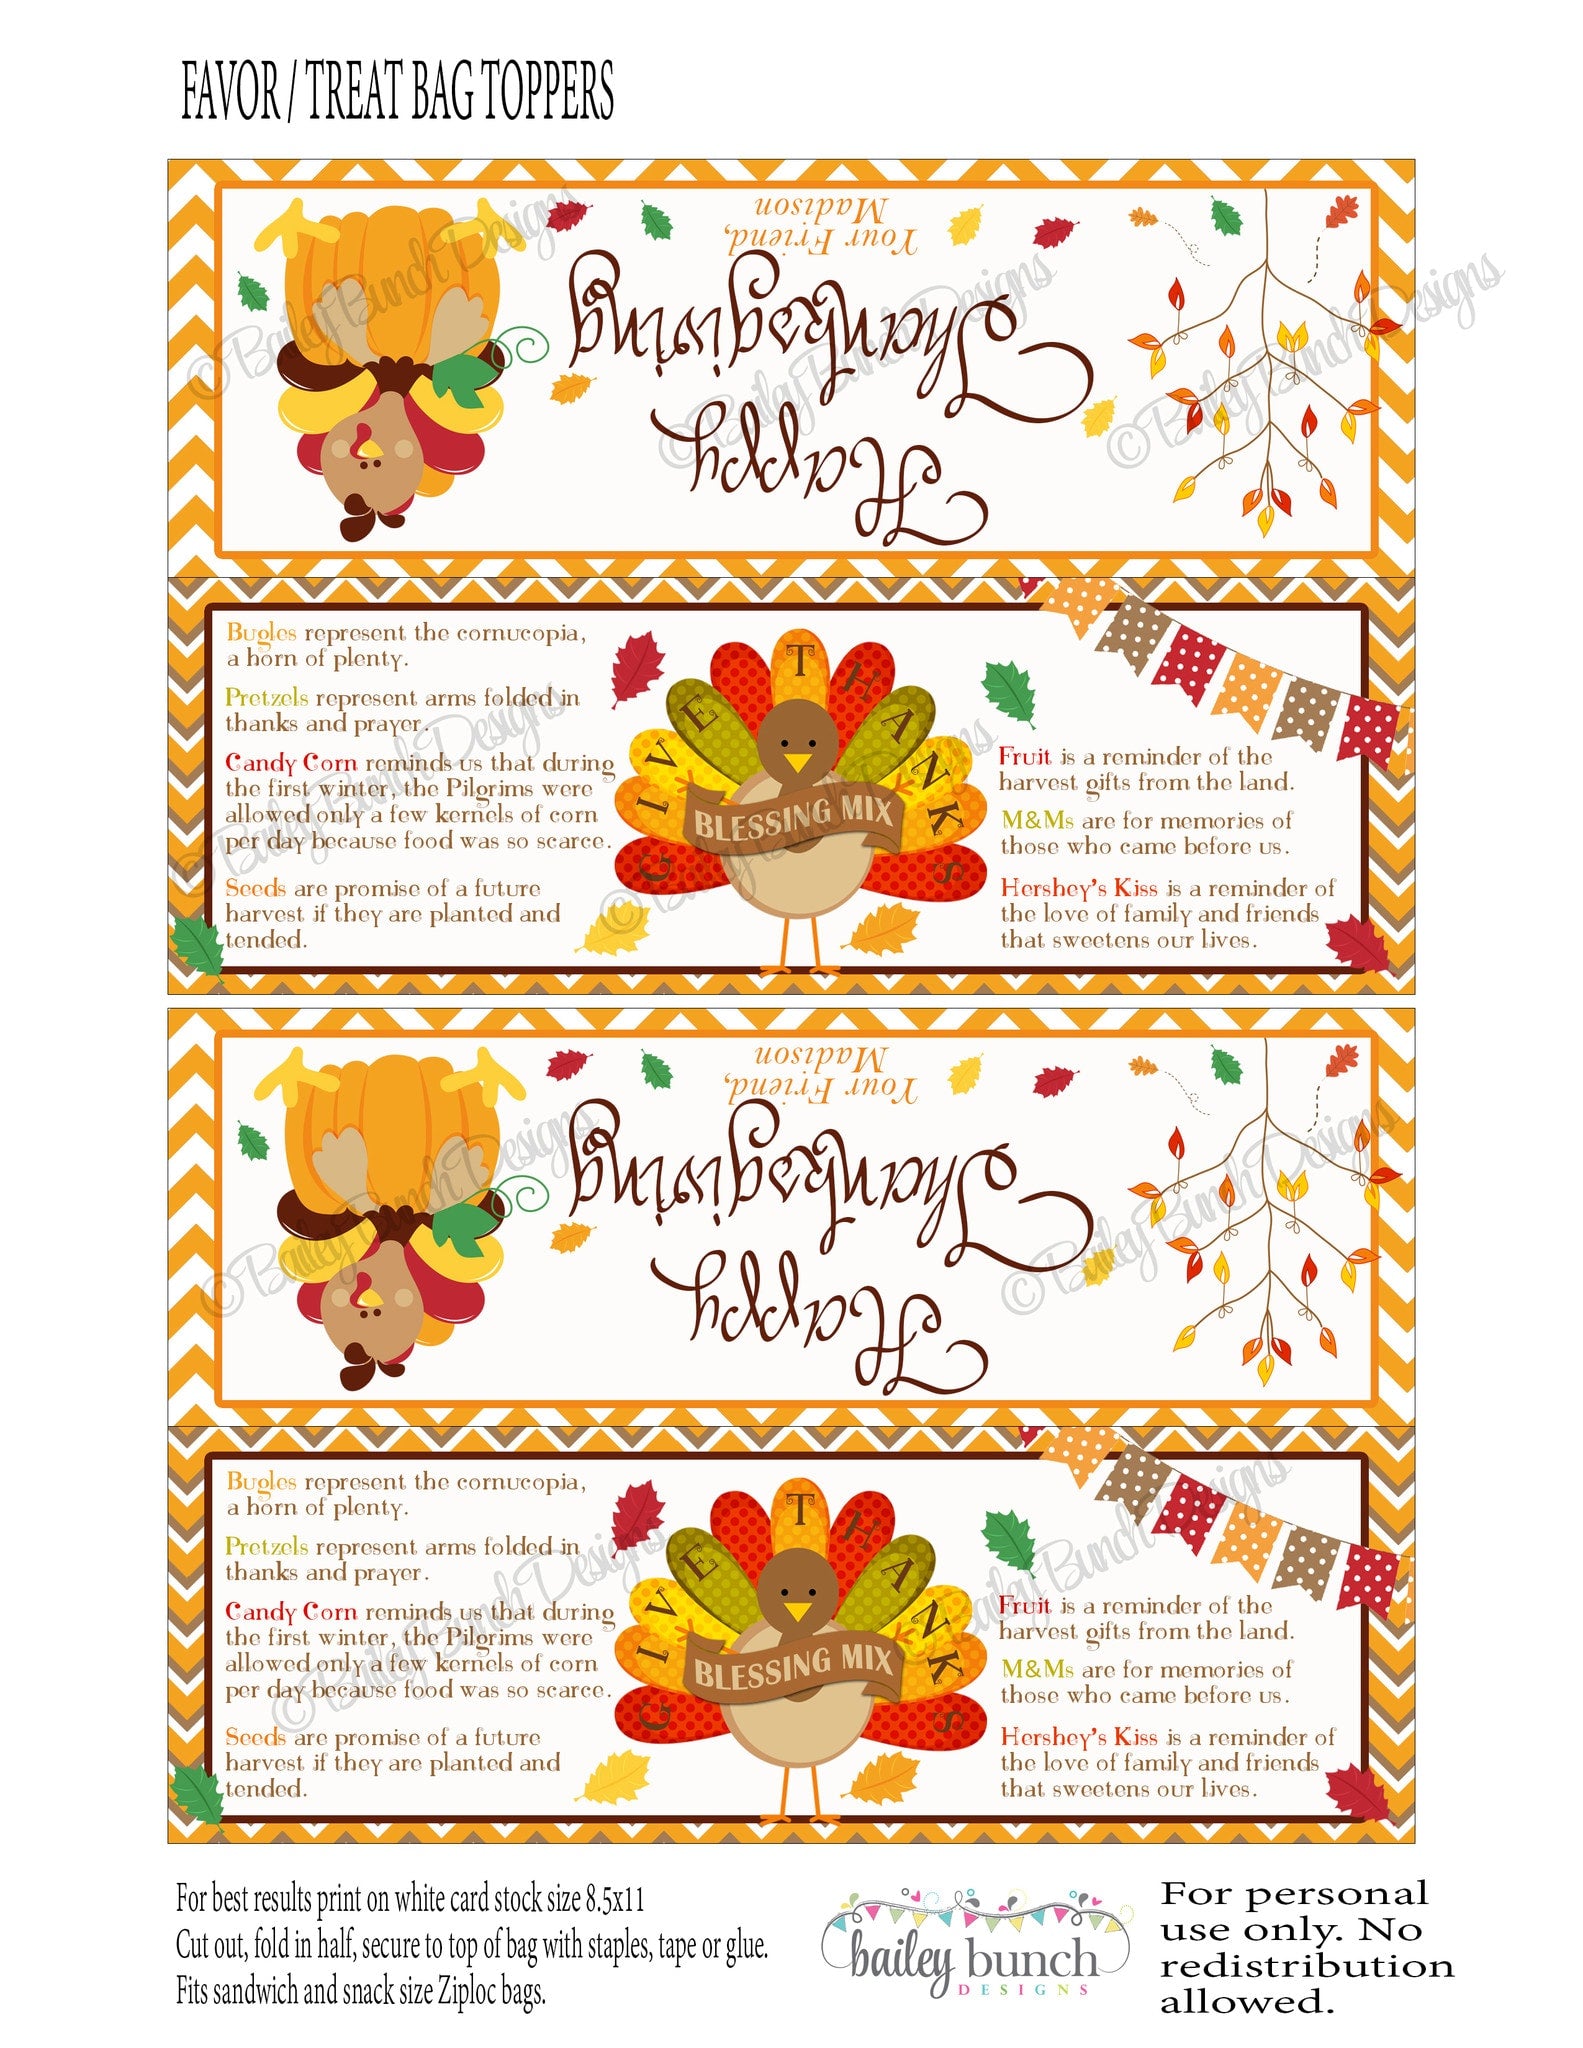 caramel-potatoes-thanksgiving-blessings-mix-and-printable-gift-tag